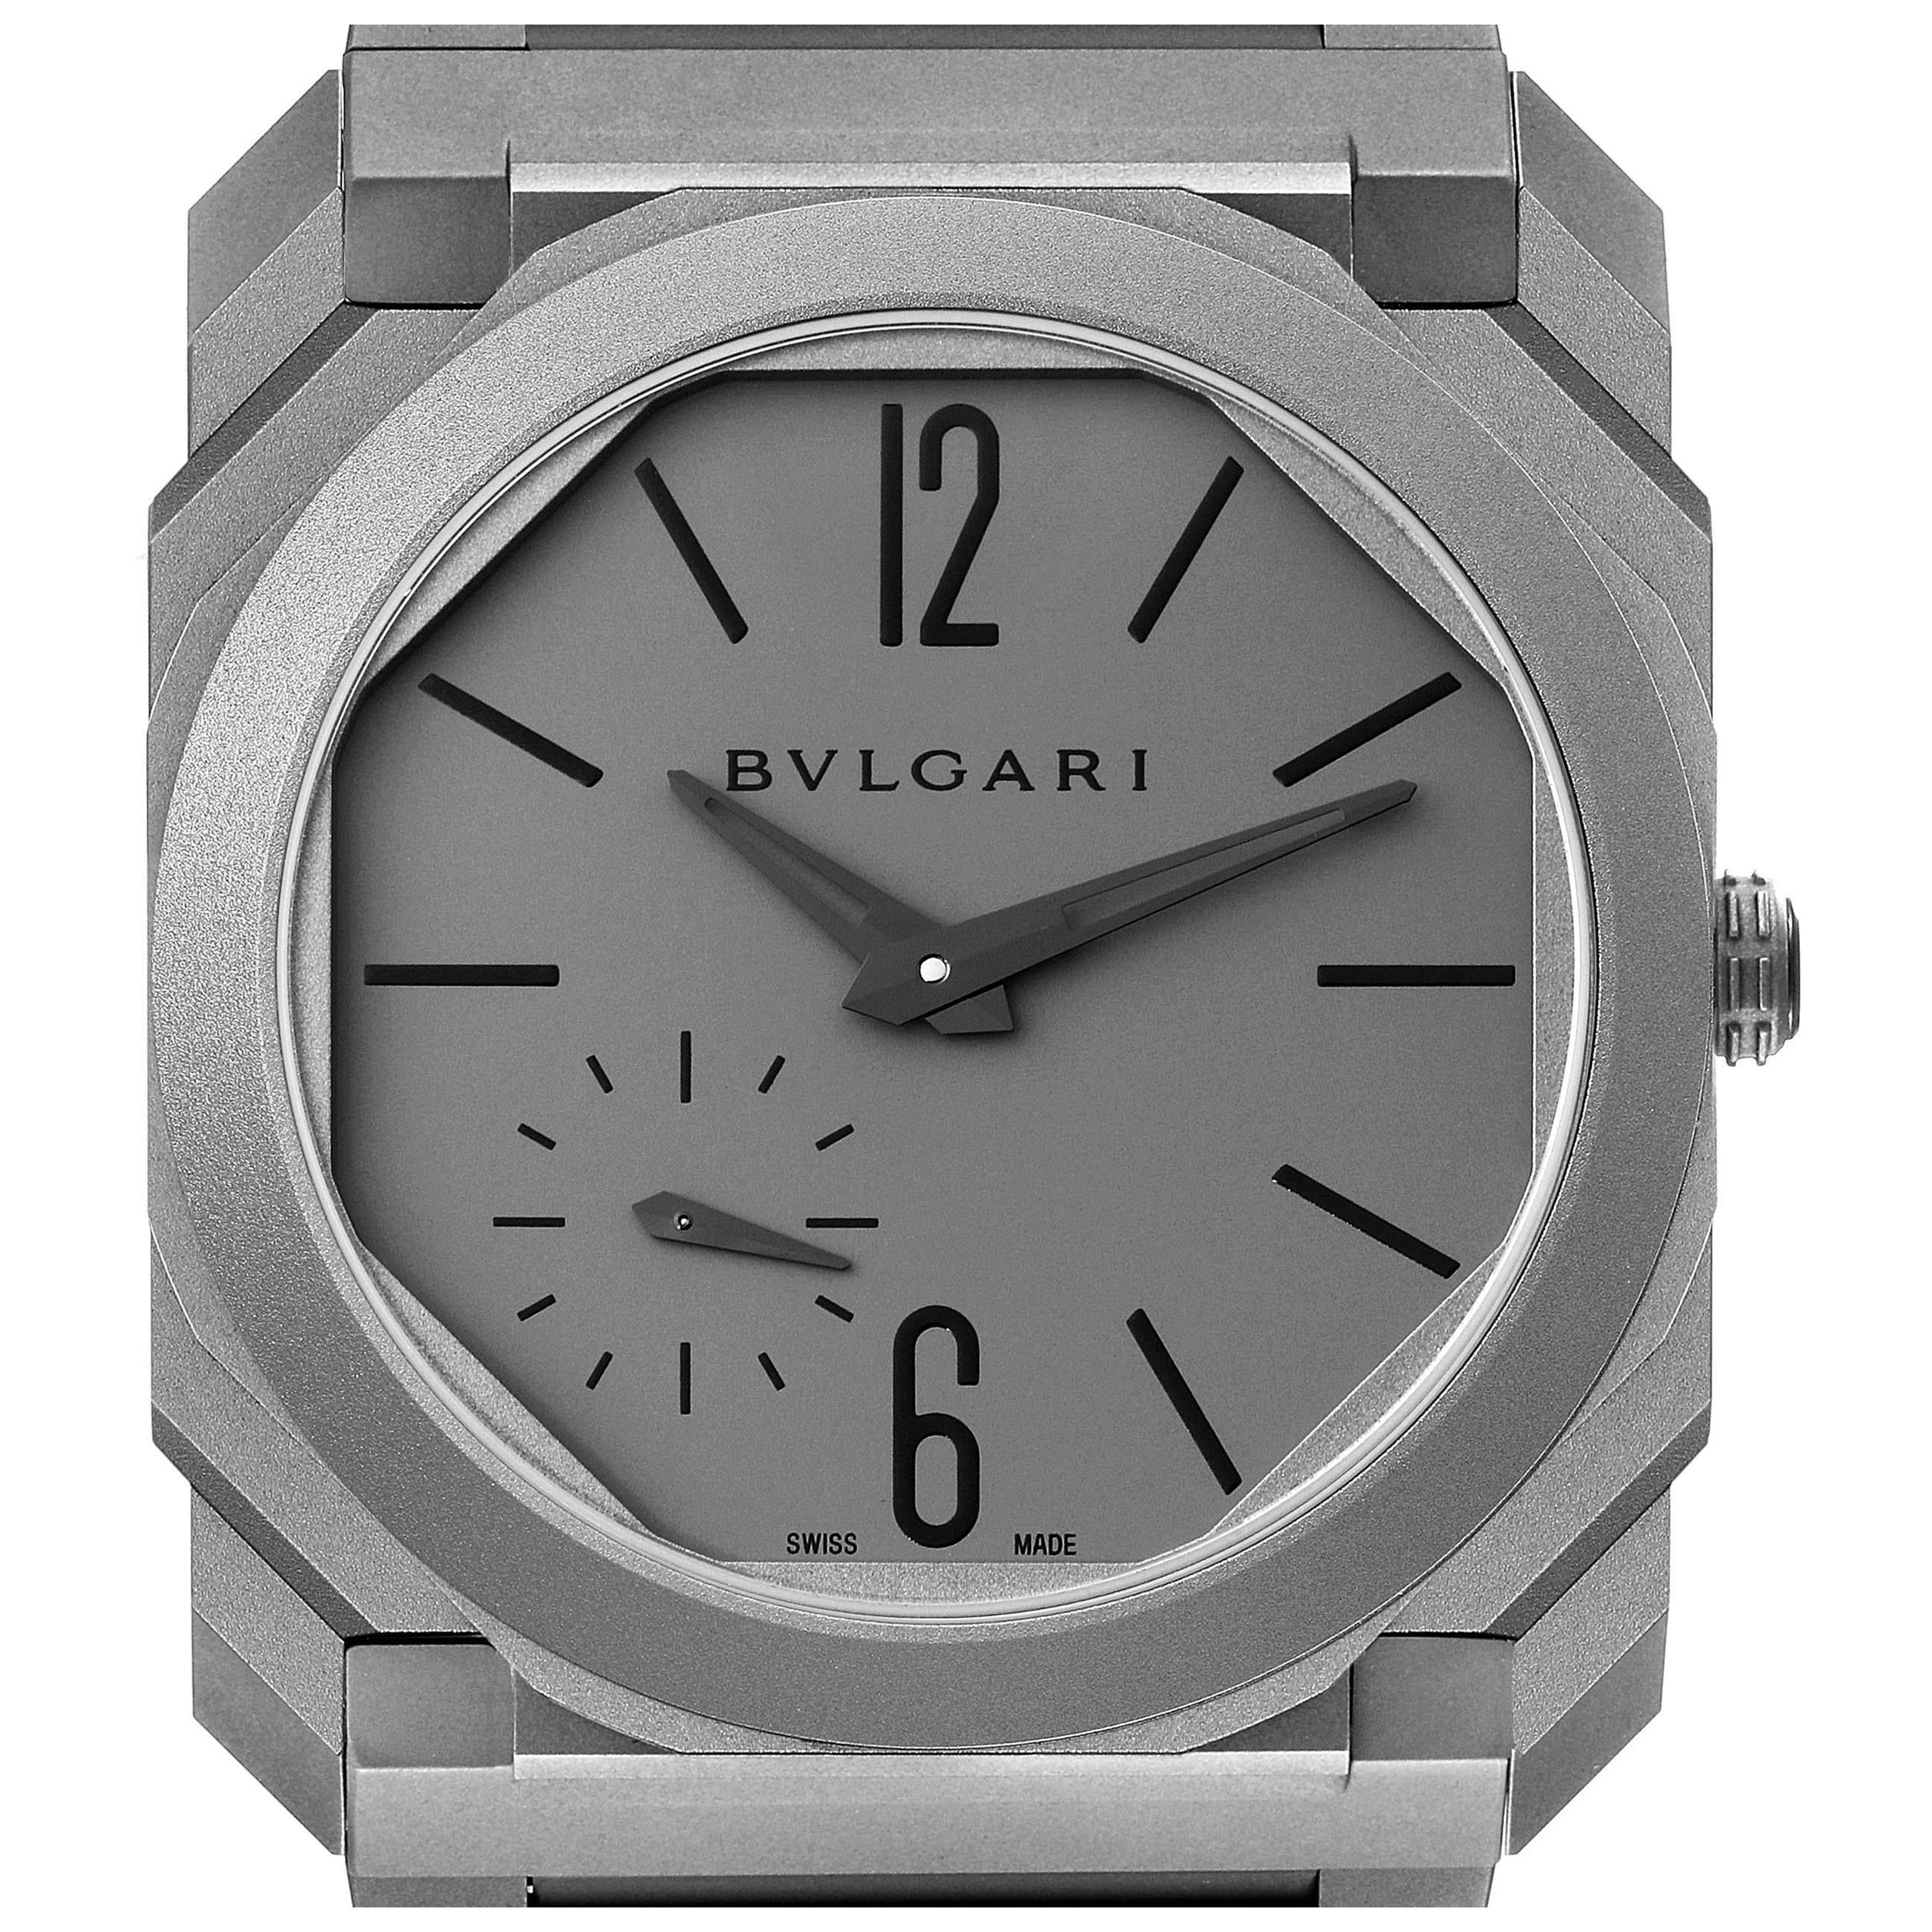 Bvlgari Octo Finissimo Titanium Ultra Thin Mens Watch 102713 Box Papers For Sale